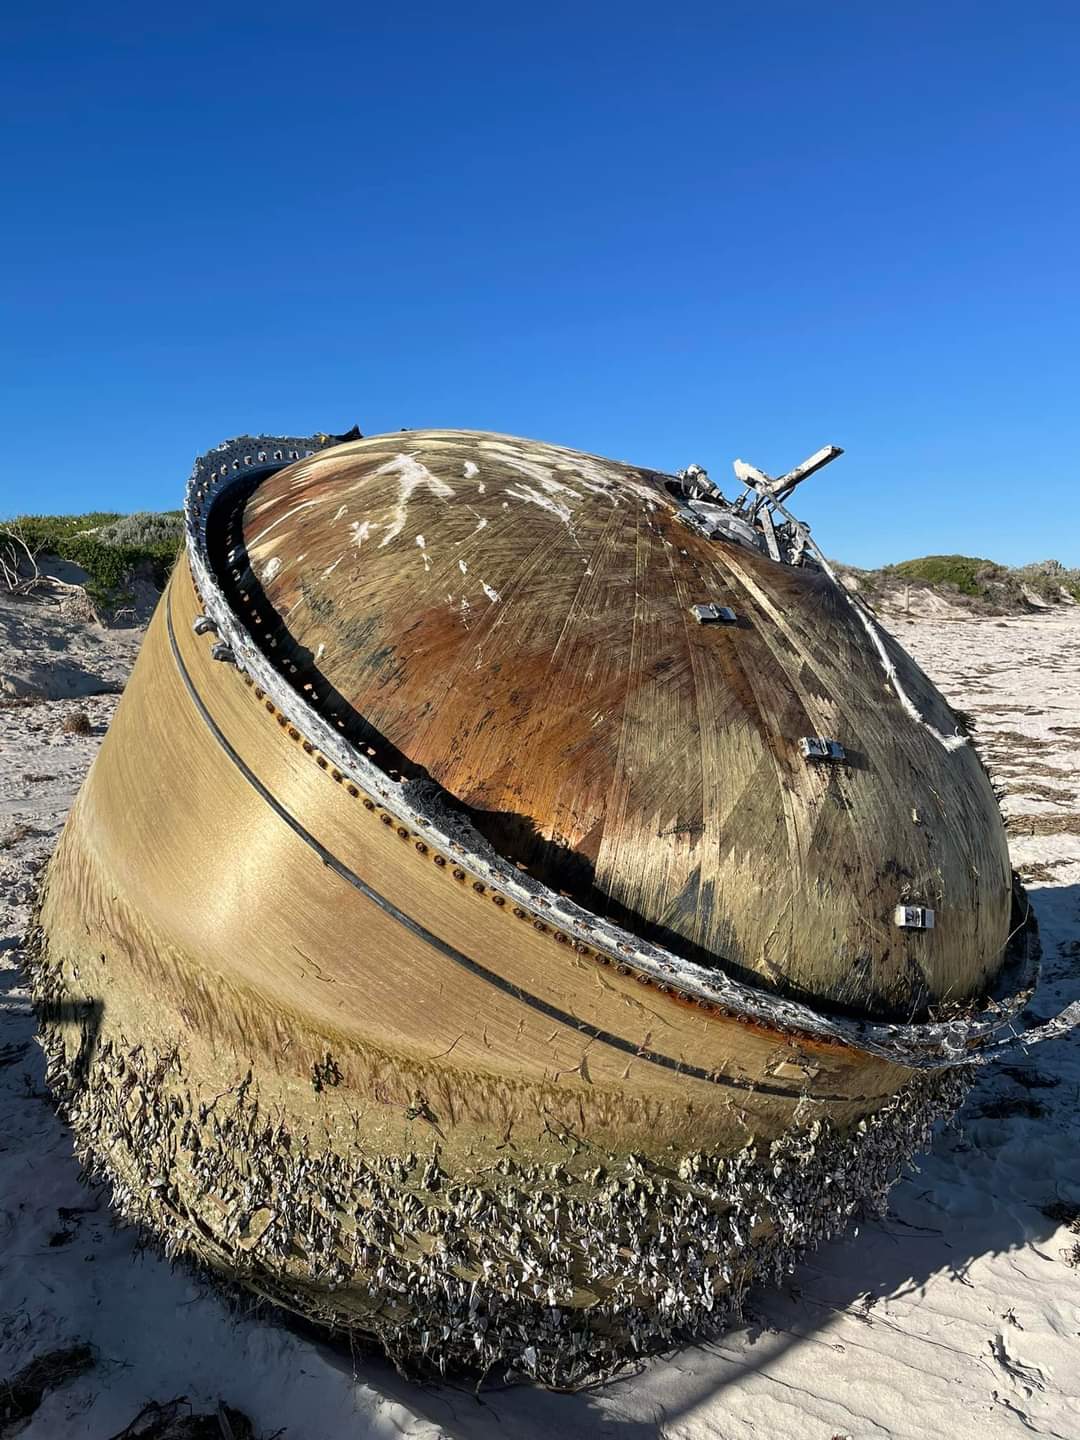 Mysterious object makes landfall in Australia